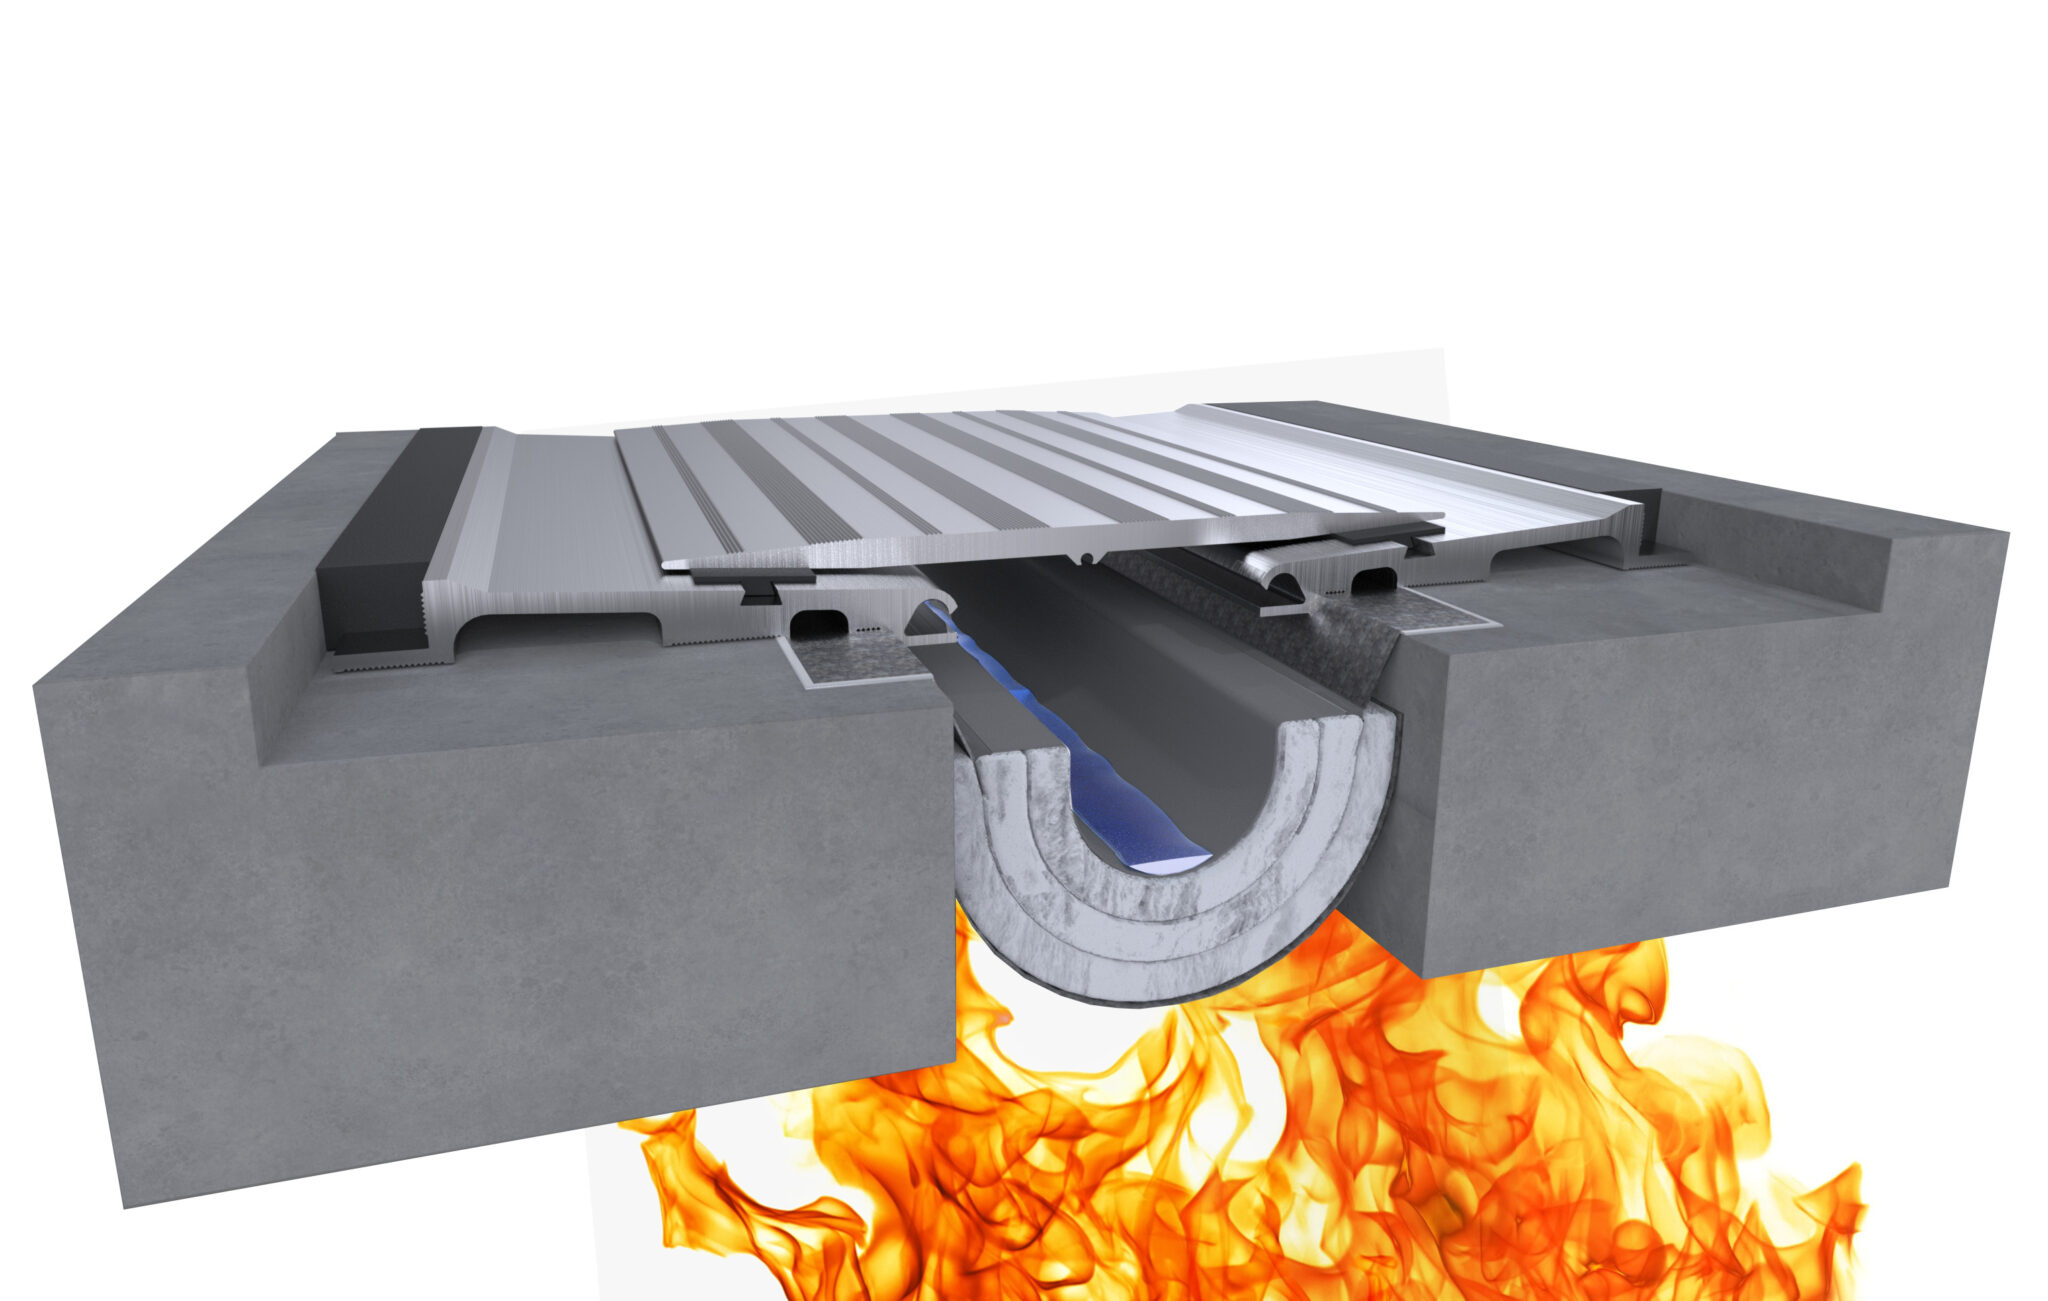 3-ISJ- The fire barrier from Inpro that is slowing the spread of fire